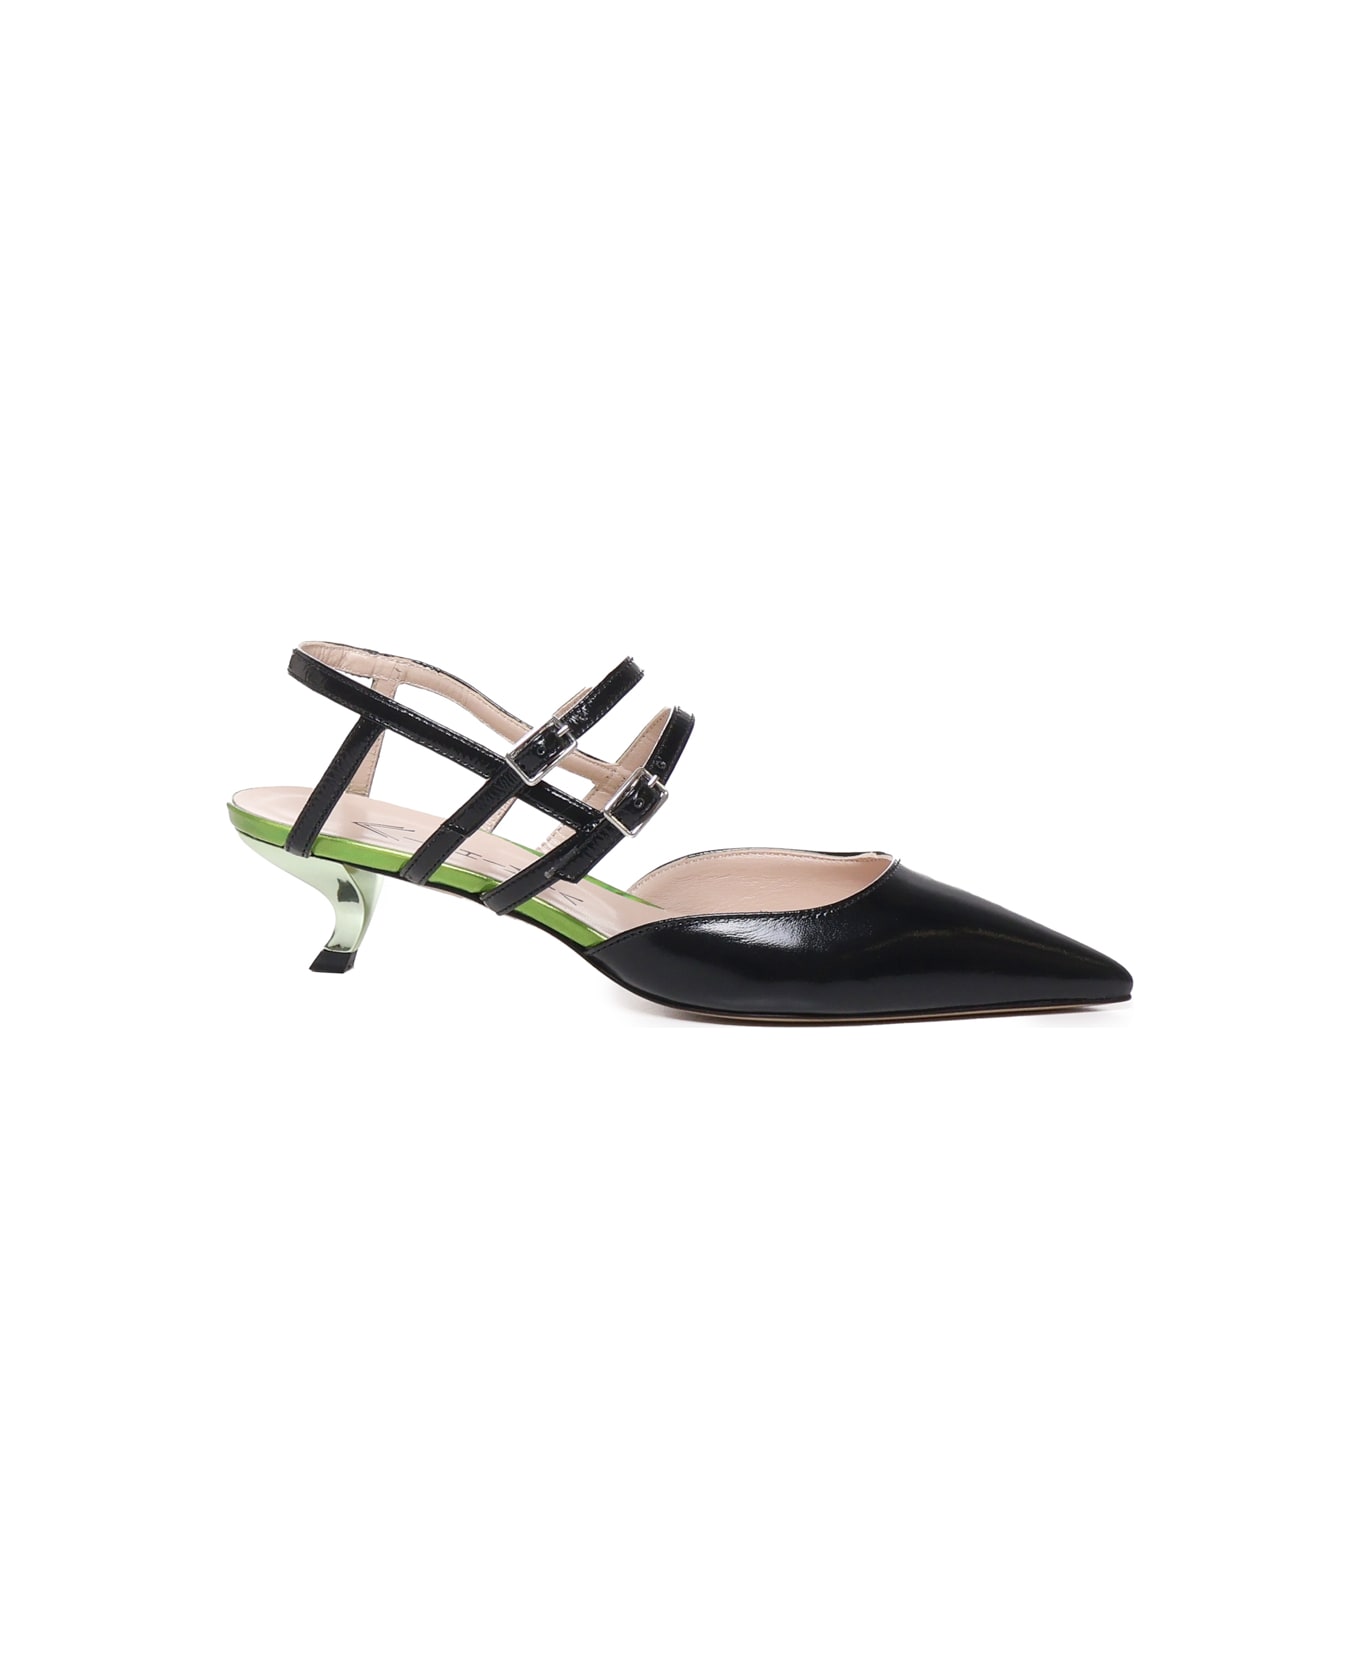 Alchimia Shoes With Toes And Straps - Black, green ハイヒール